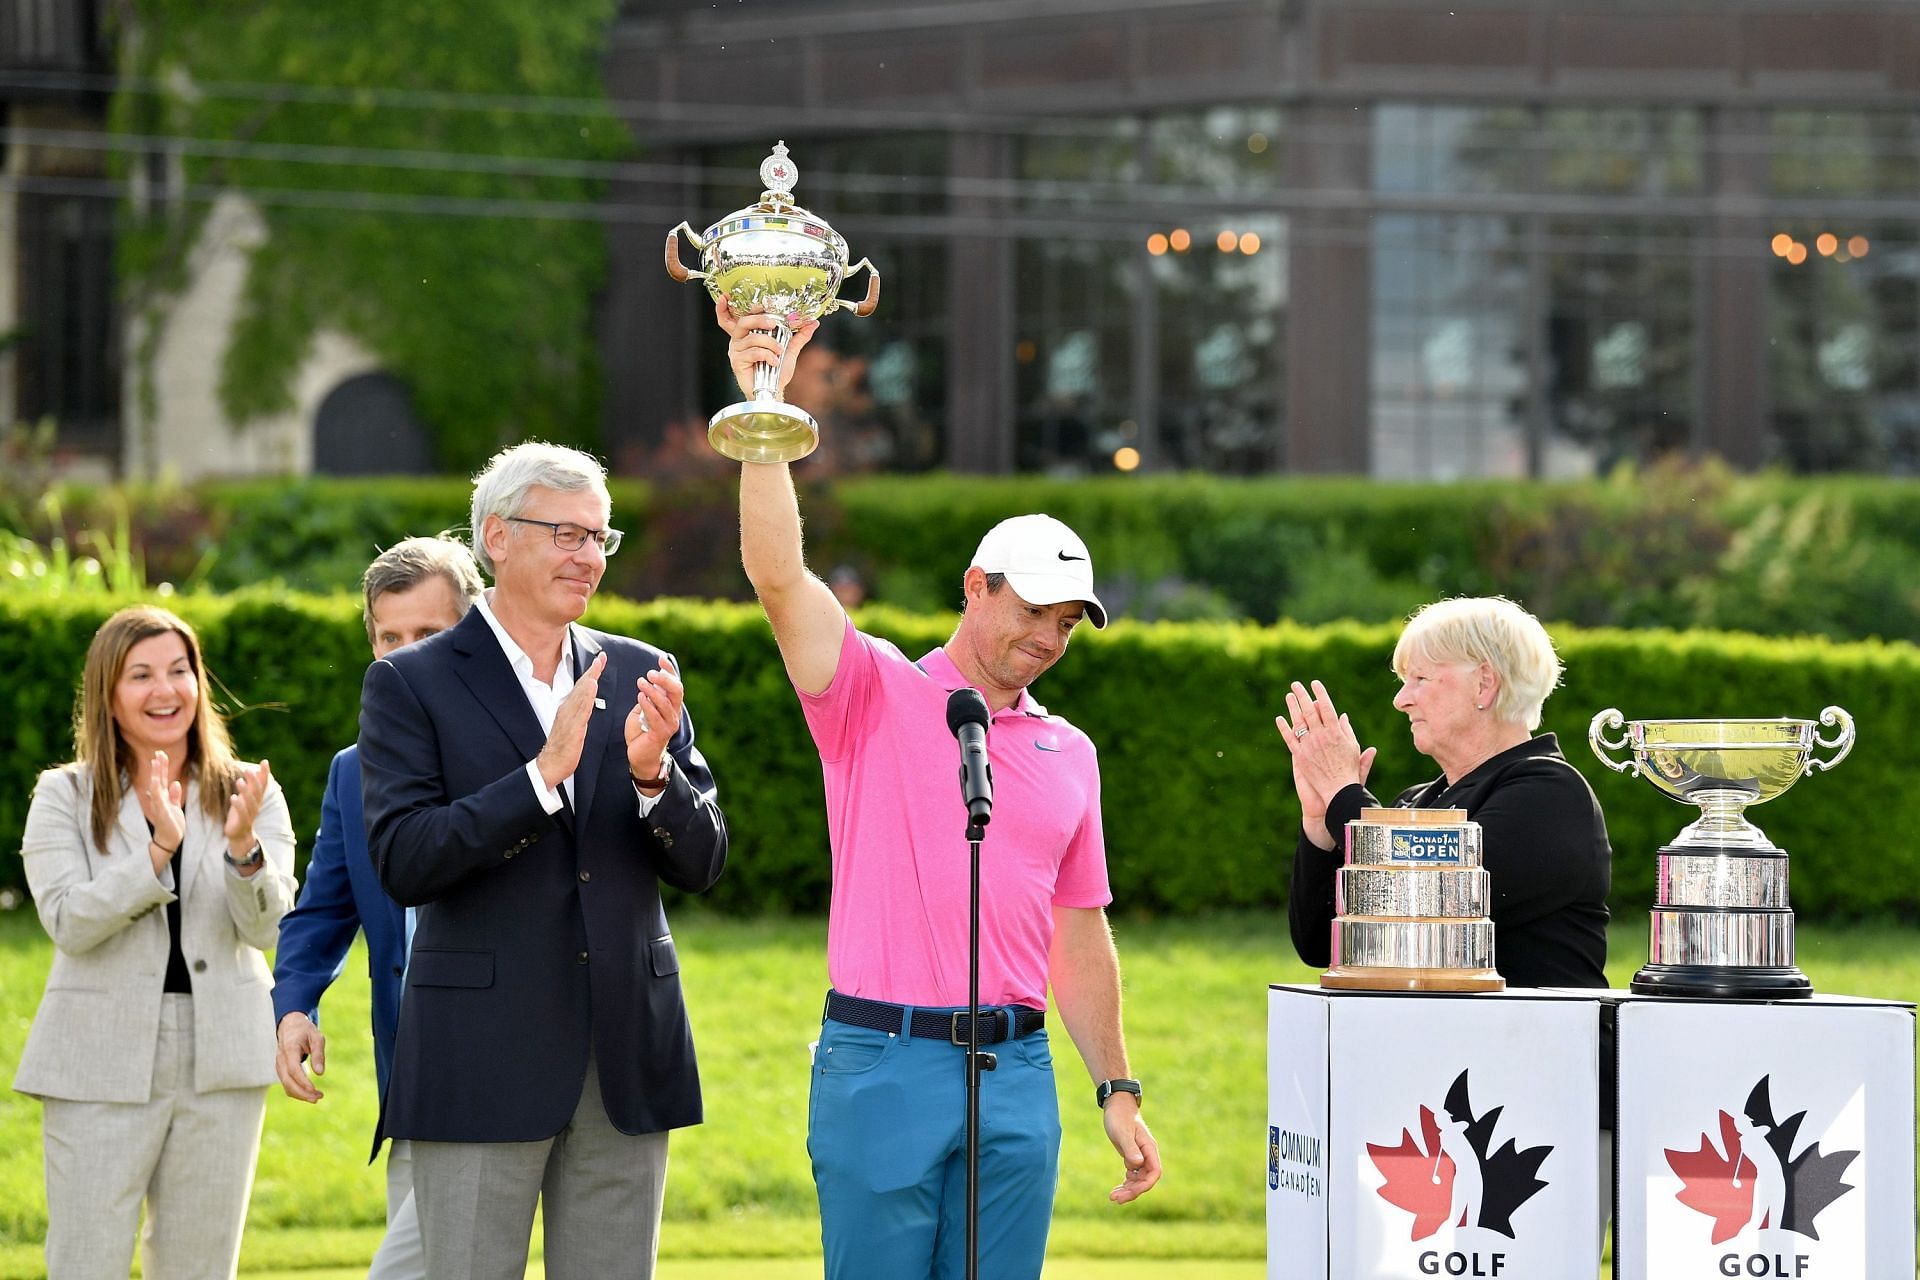 Can Rory McIlroy complete a threepeat in the RBC Canadian Open 2023